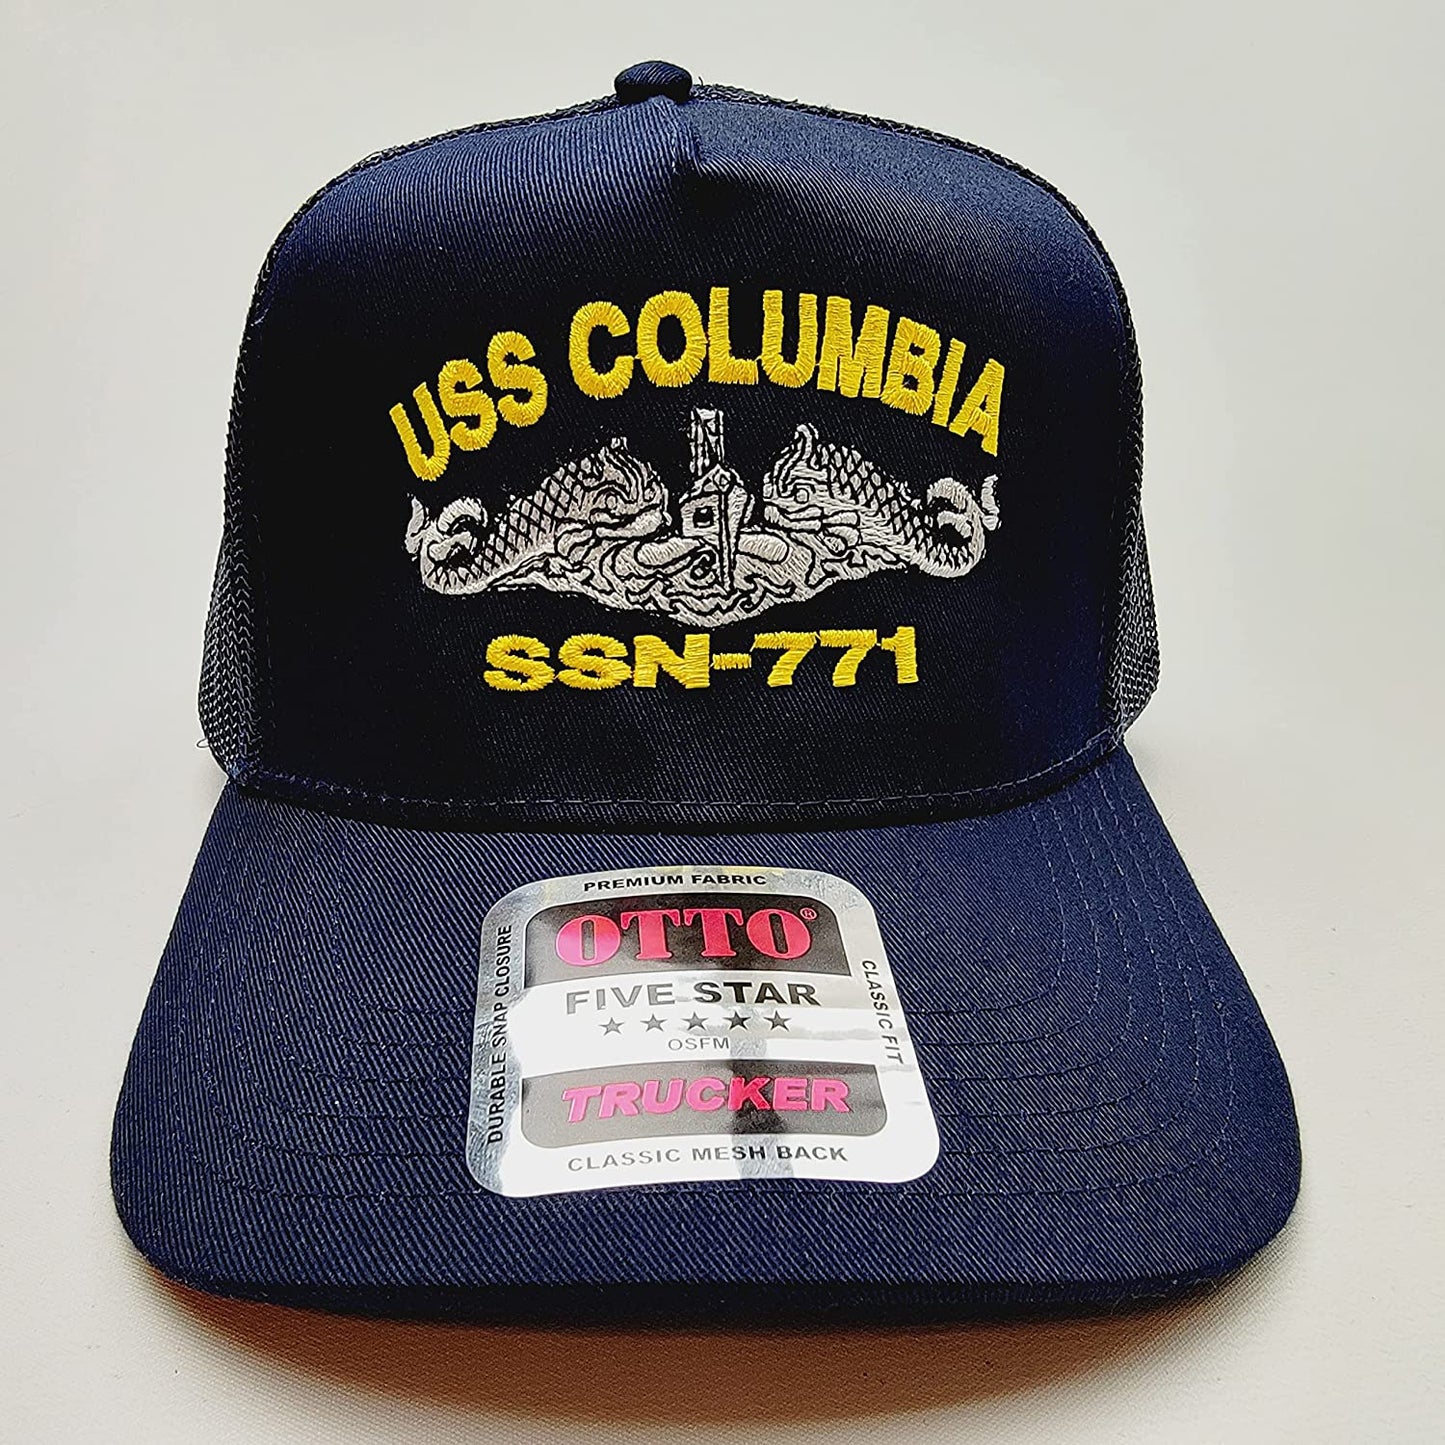 US NAVY USS COLUMBIA SSN-771 Embroidered Hat Baseball Cap Adjustable Blue